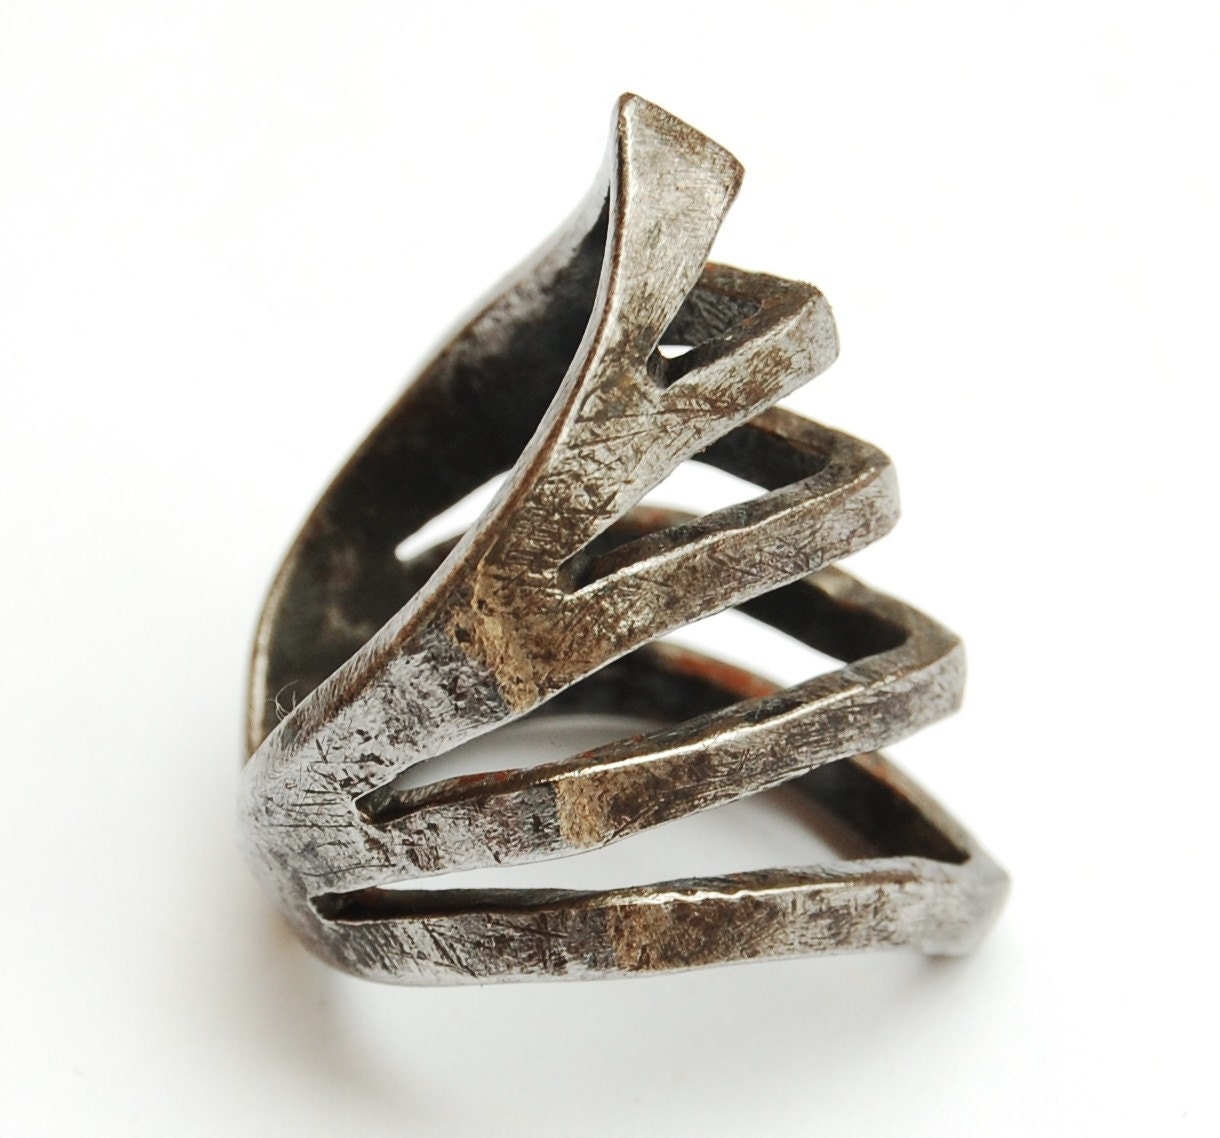 Ribcage iron ring by blindspotjewellery at Etsy